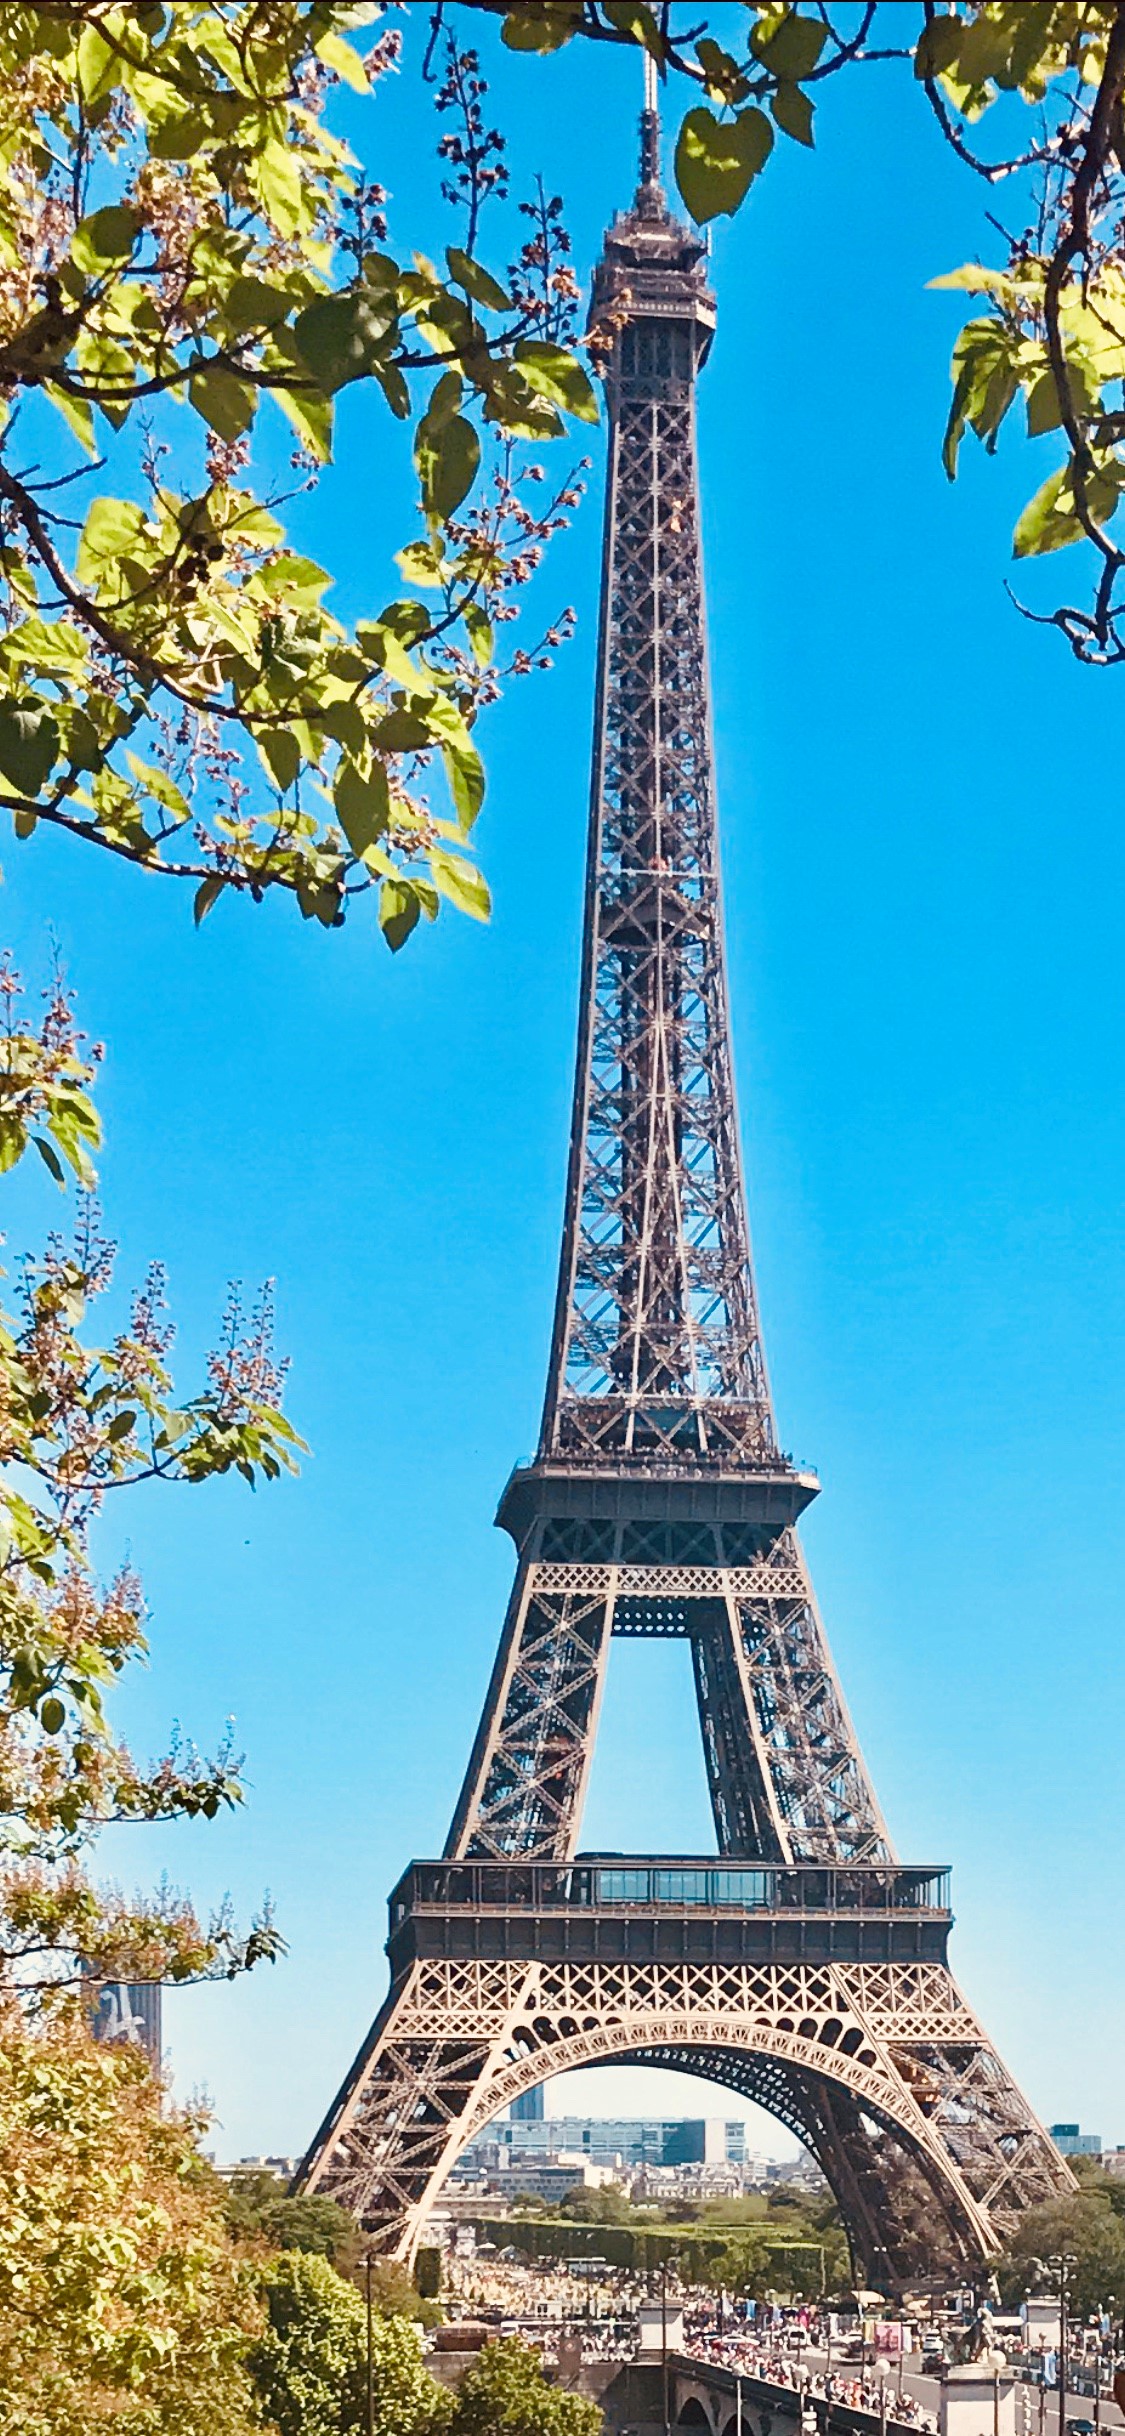 Eiffel Tower evacuated due to bomb threat